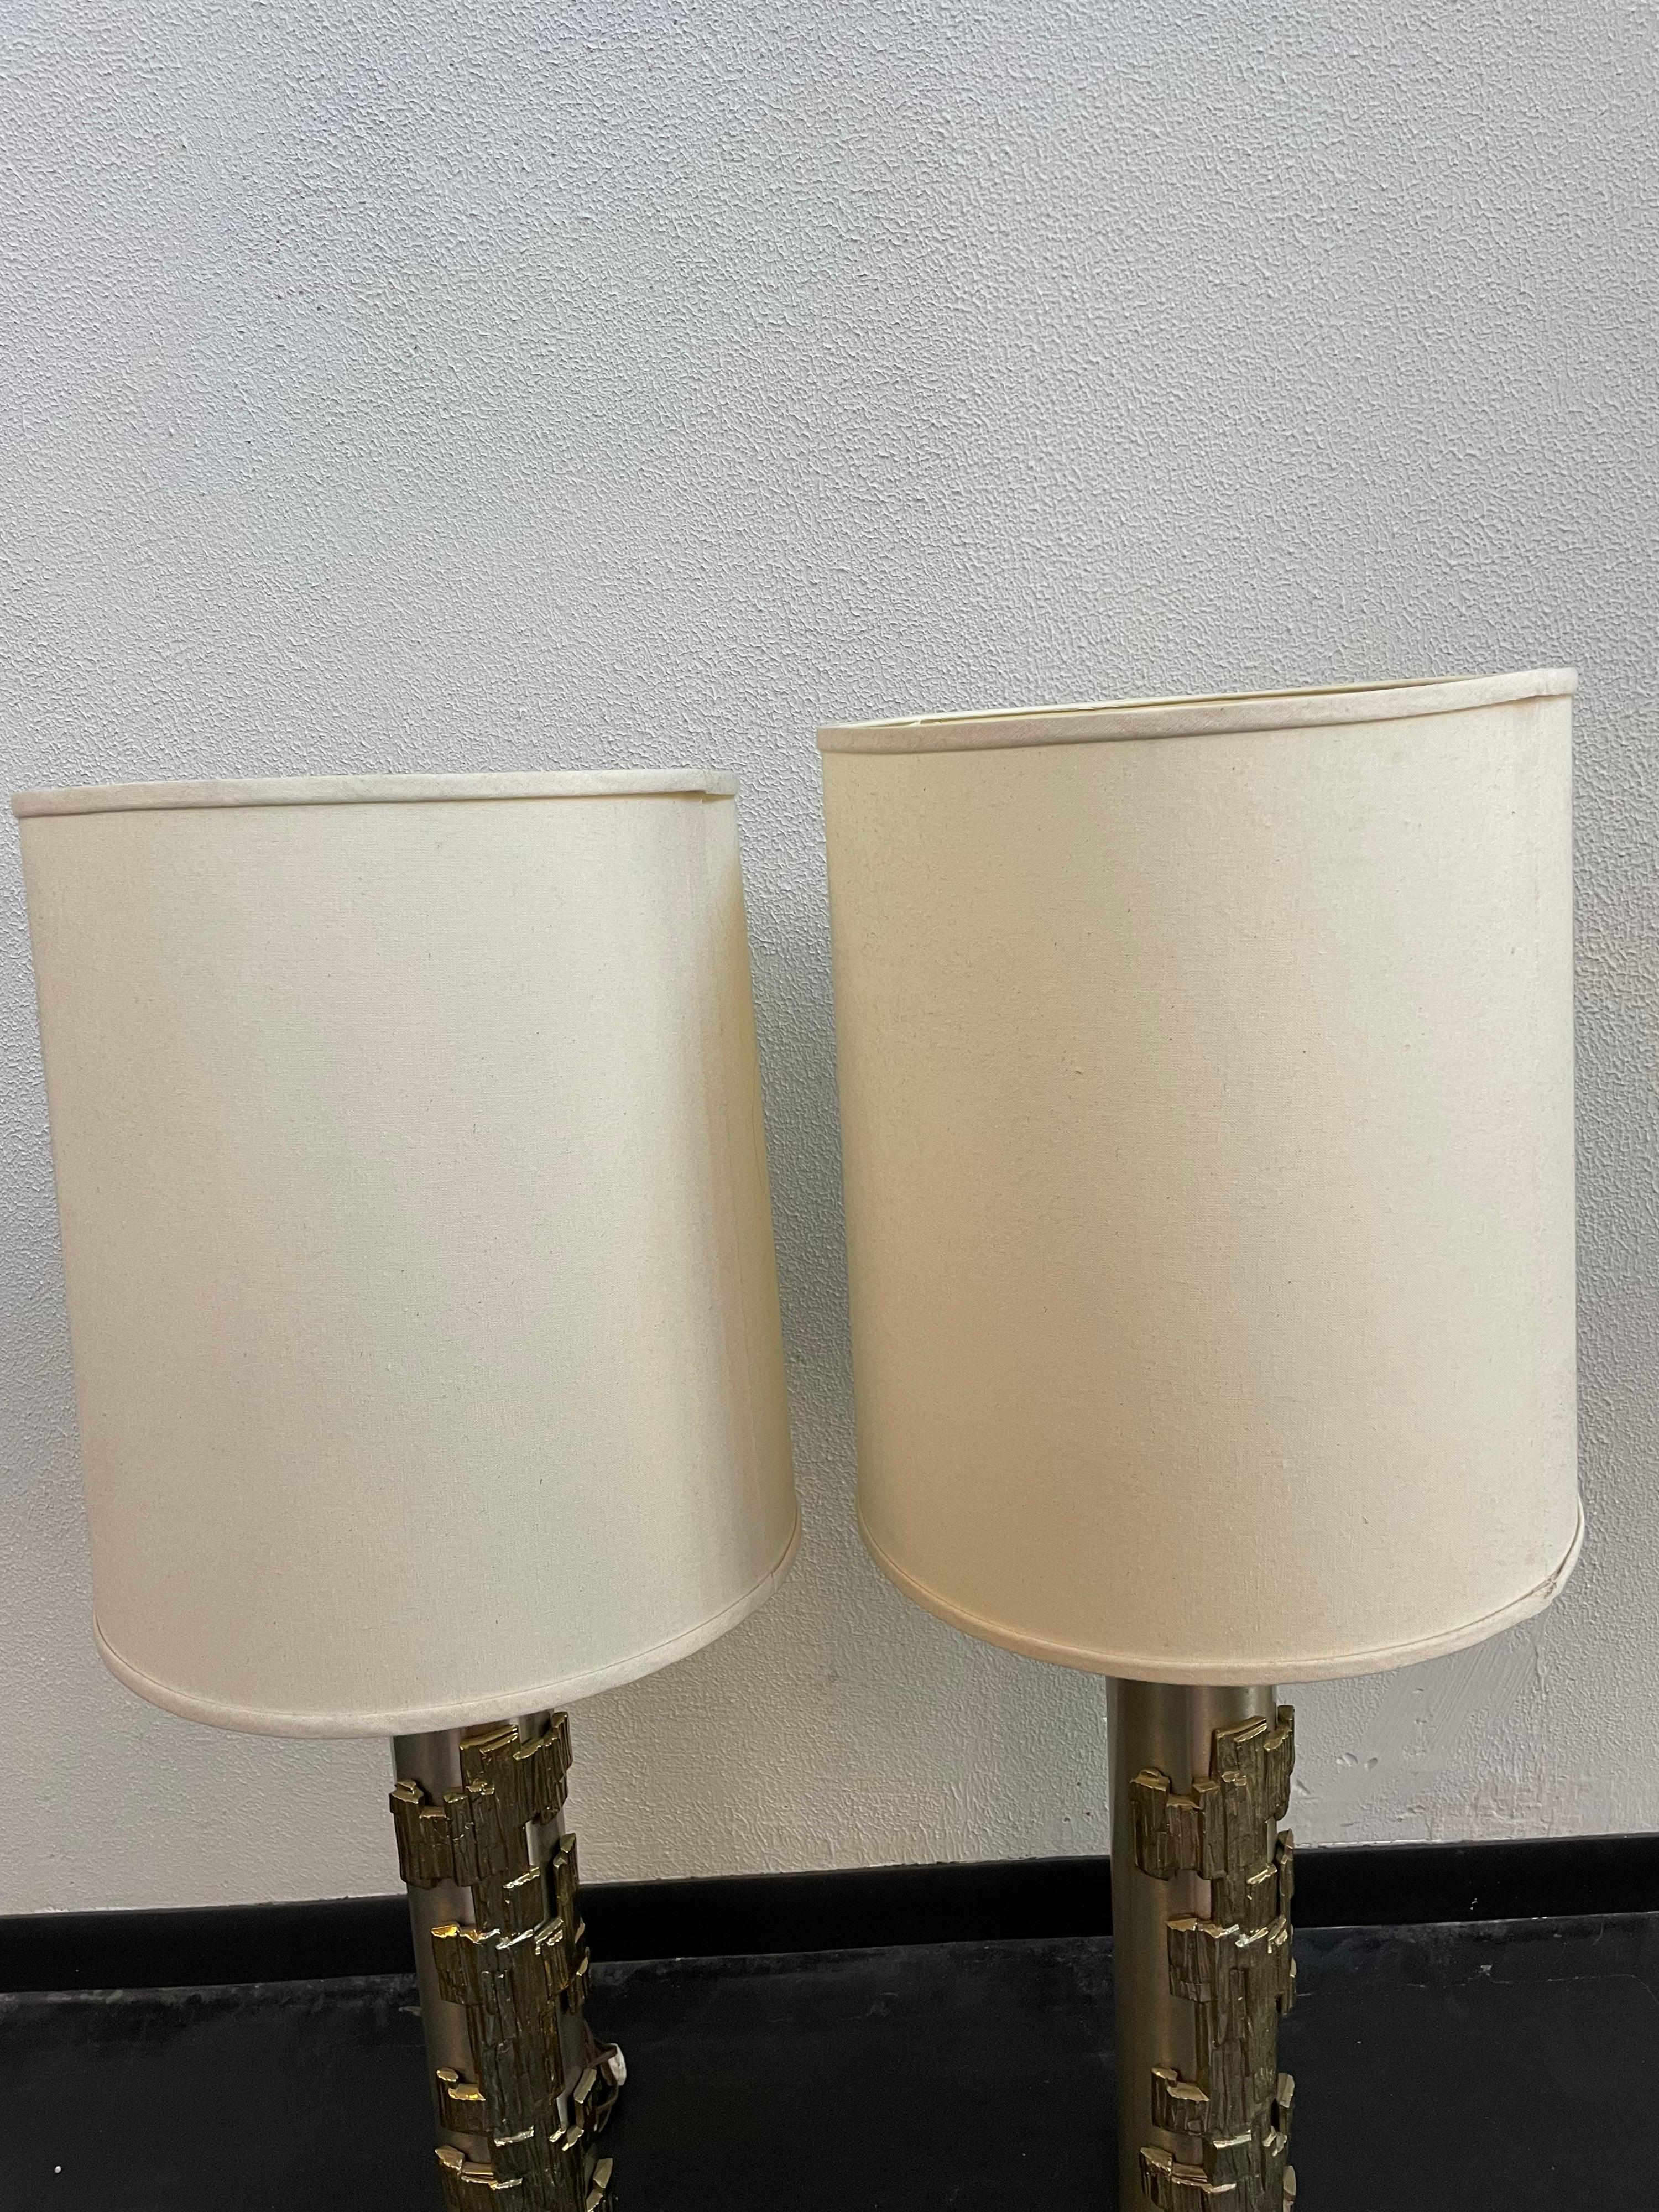 Brass Rare Mid-Century Modern Laurel Table Lamps, a Pair For Sale